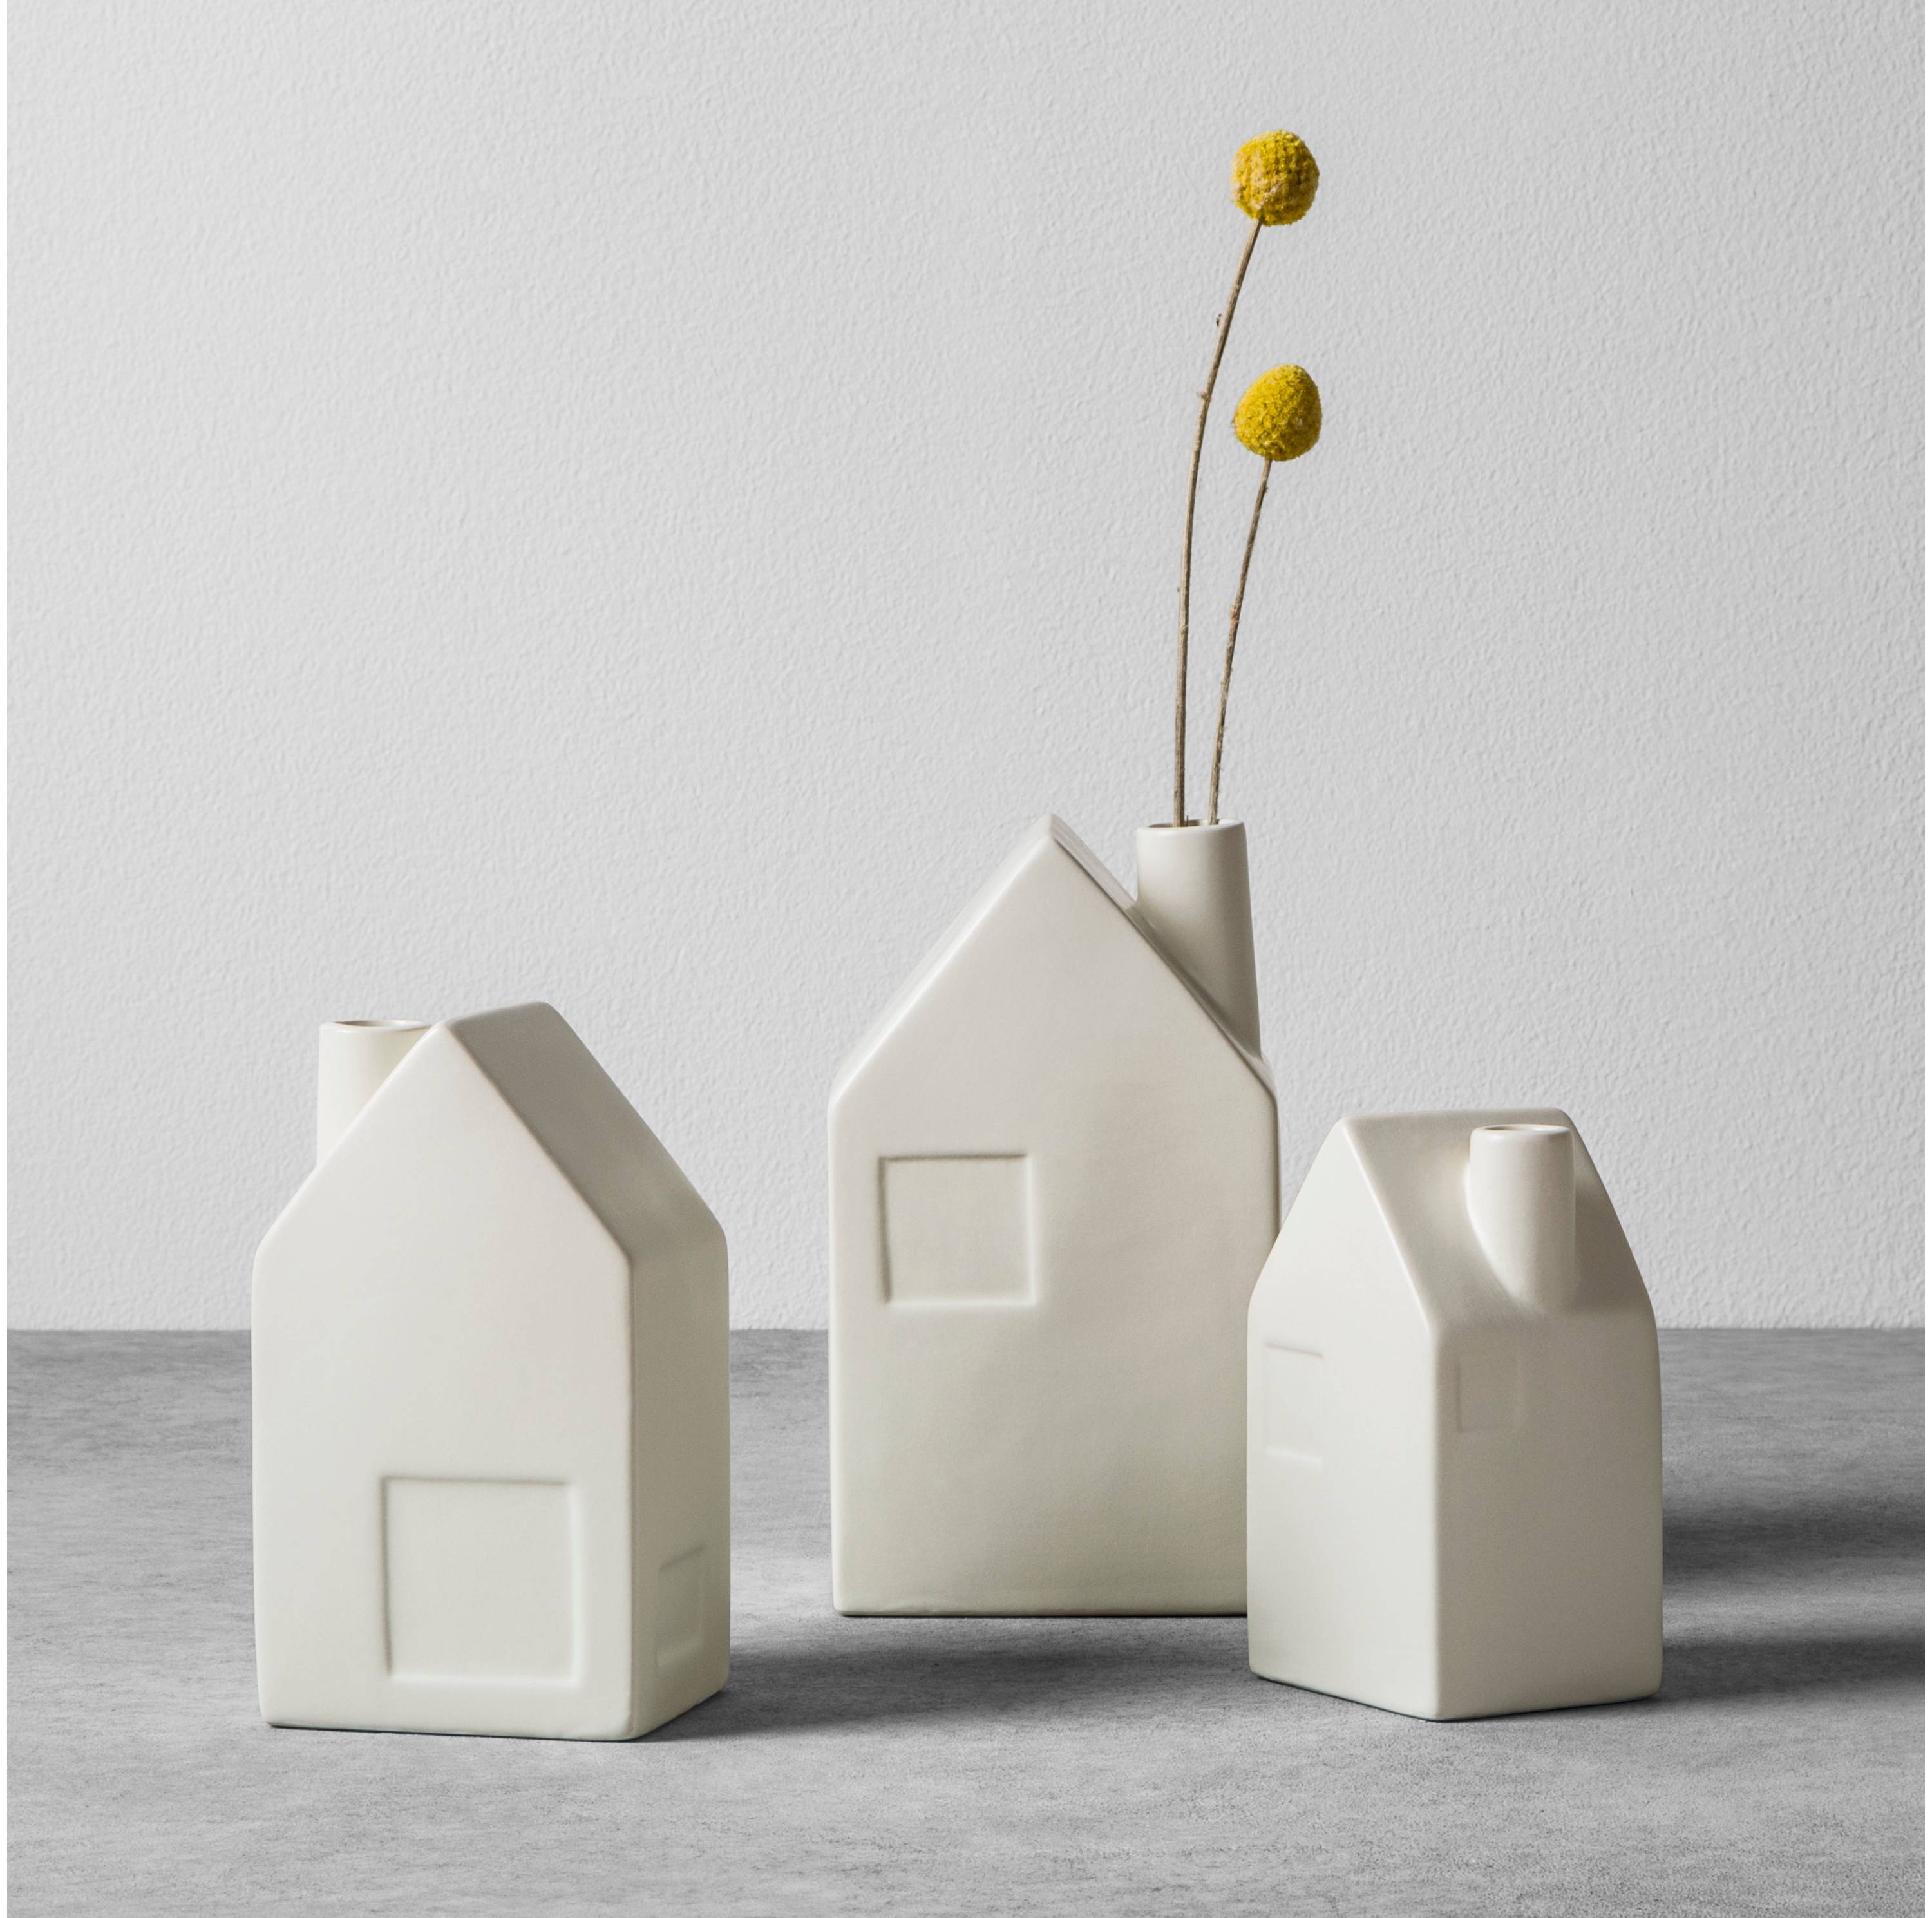 White vases that look like homes with a branch in one of them.